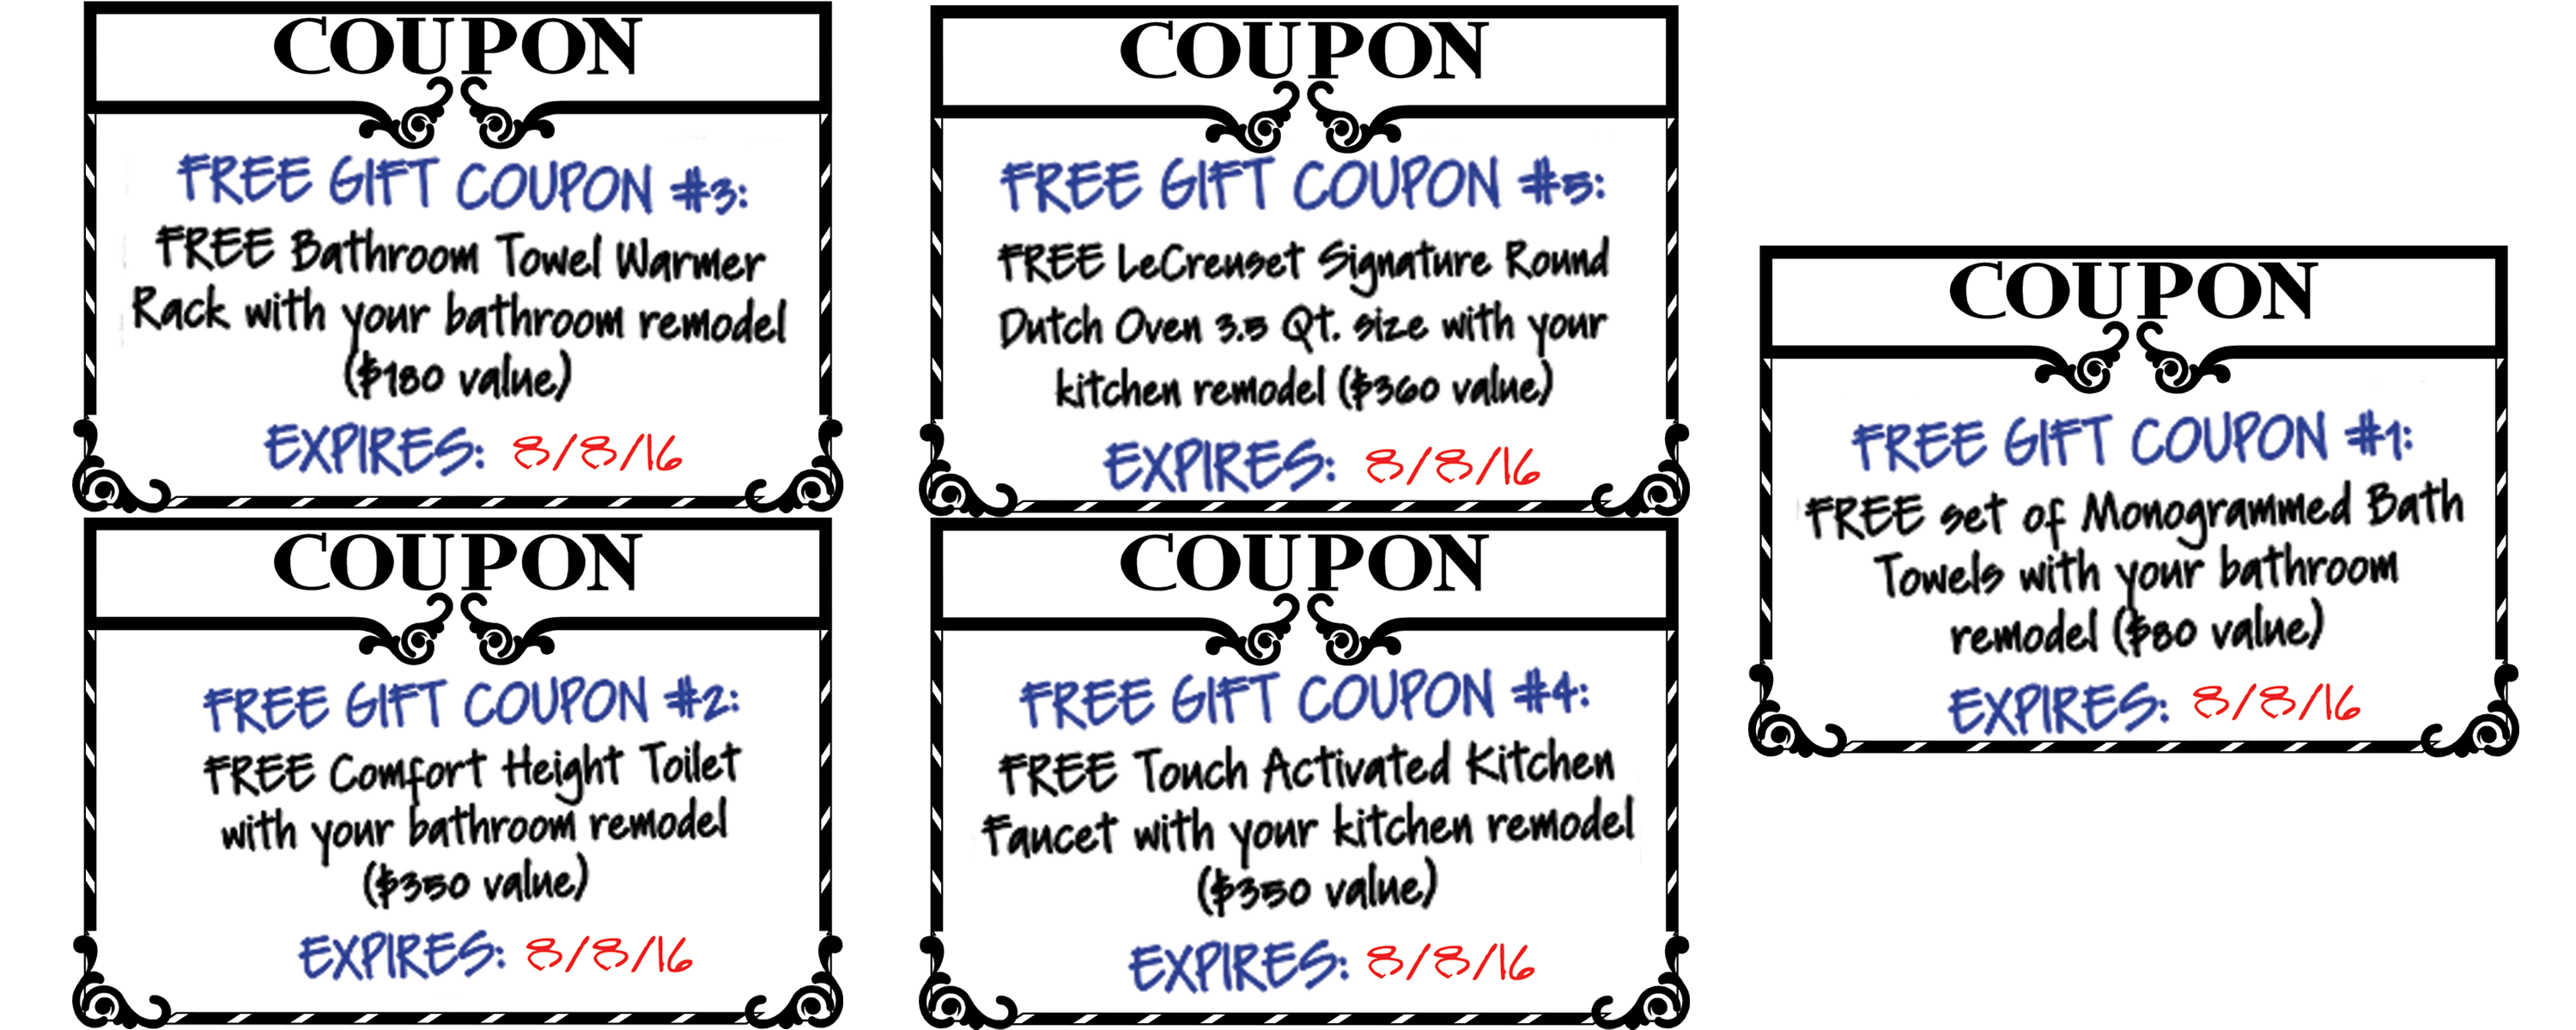 remodeling_coupons_august_offers